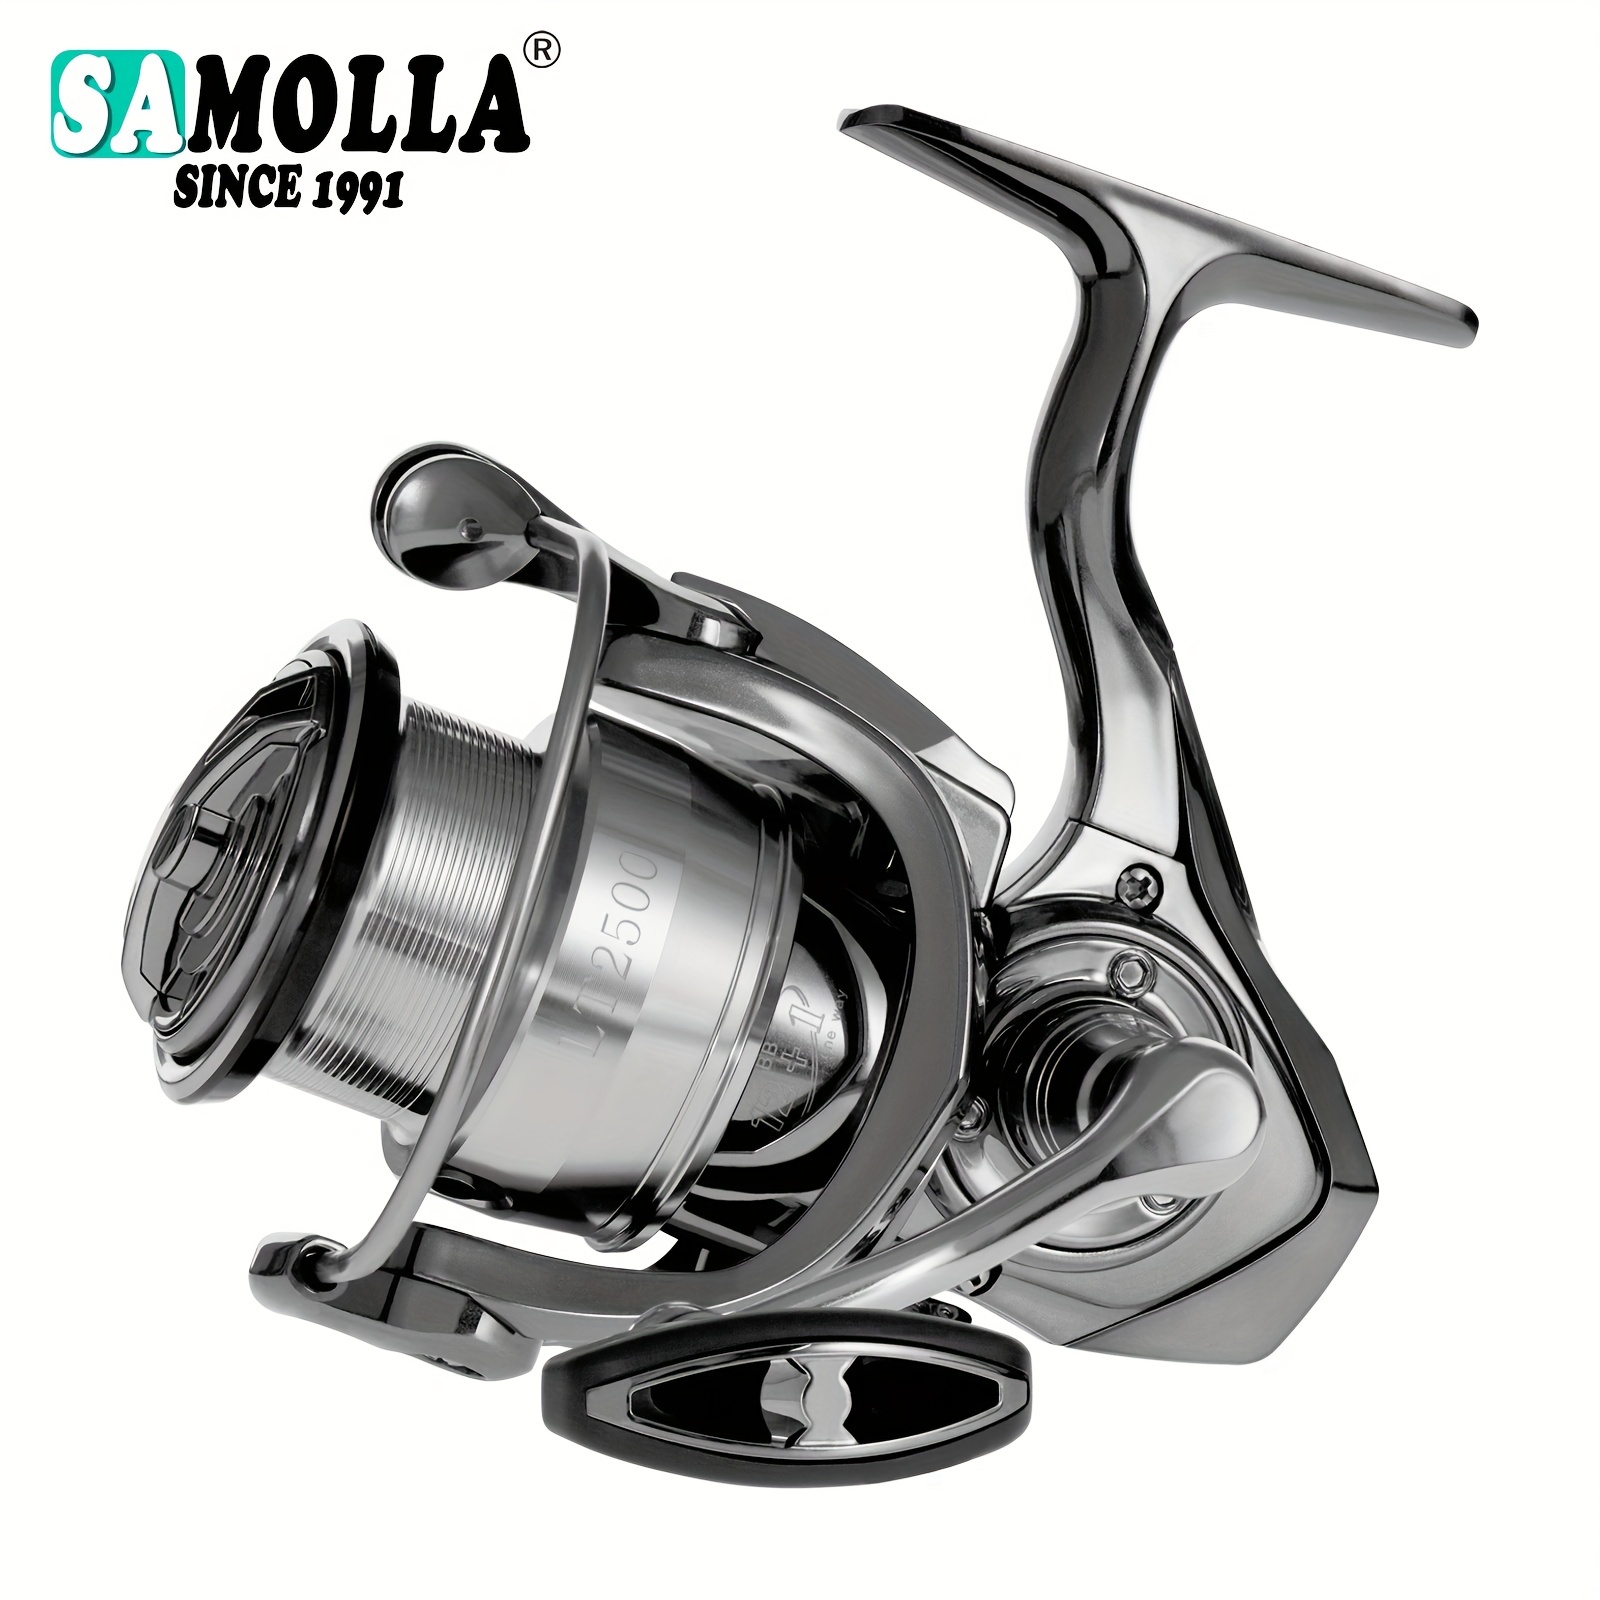 1pc High Strength 6bb Ultra Light Spinning Fishing Reels, 1500/2500 Series  6.2:1 Metal Spinning Reel With Aluminum Shallow Cup, Fishing Tackle, Today's Best Daily Deals